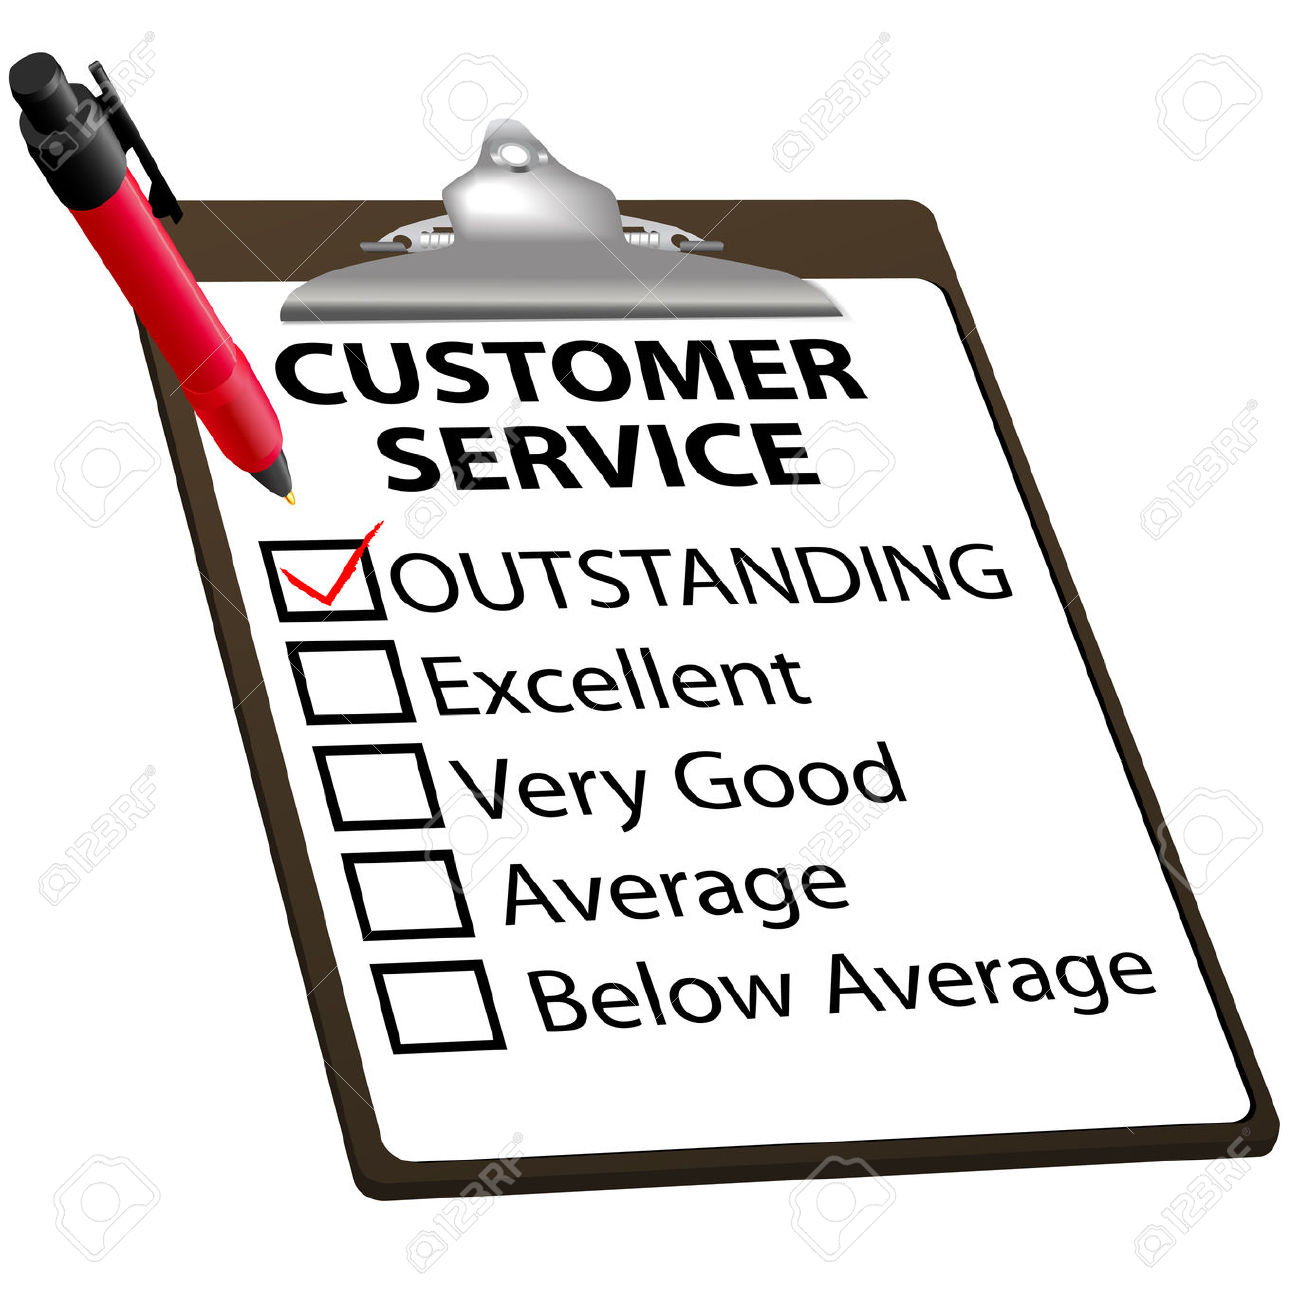 Great customer service clipart - Clipground